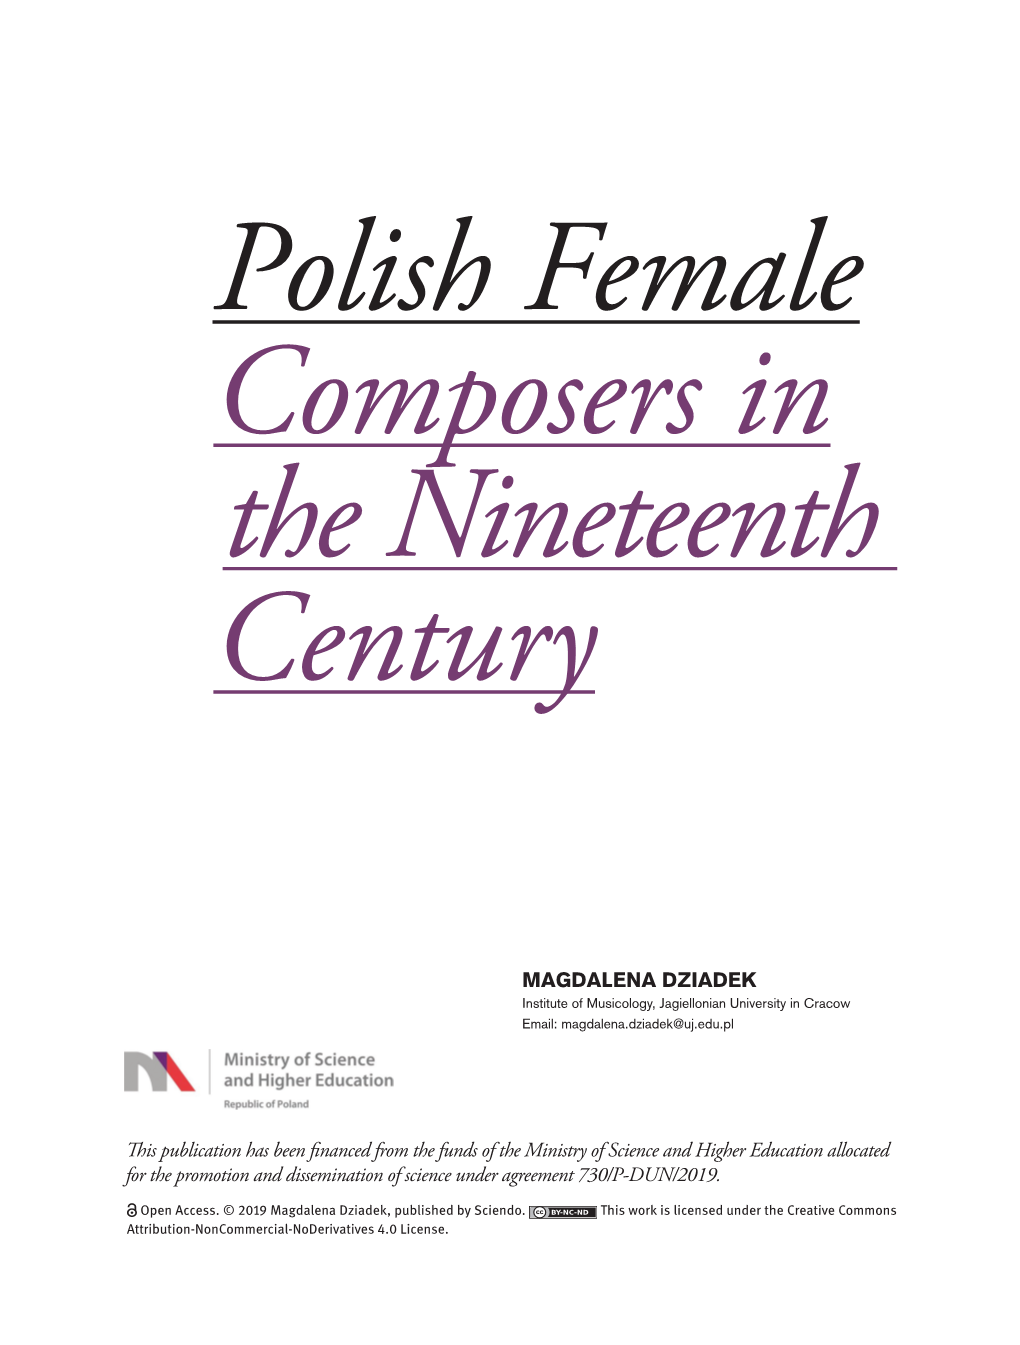 Polish Female Composers in the Nineteenth Century